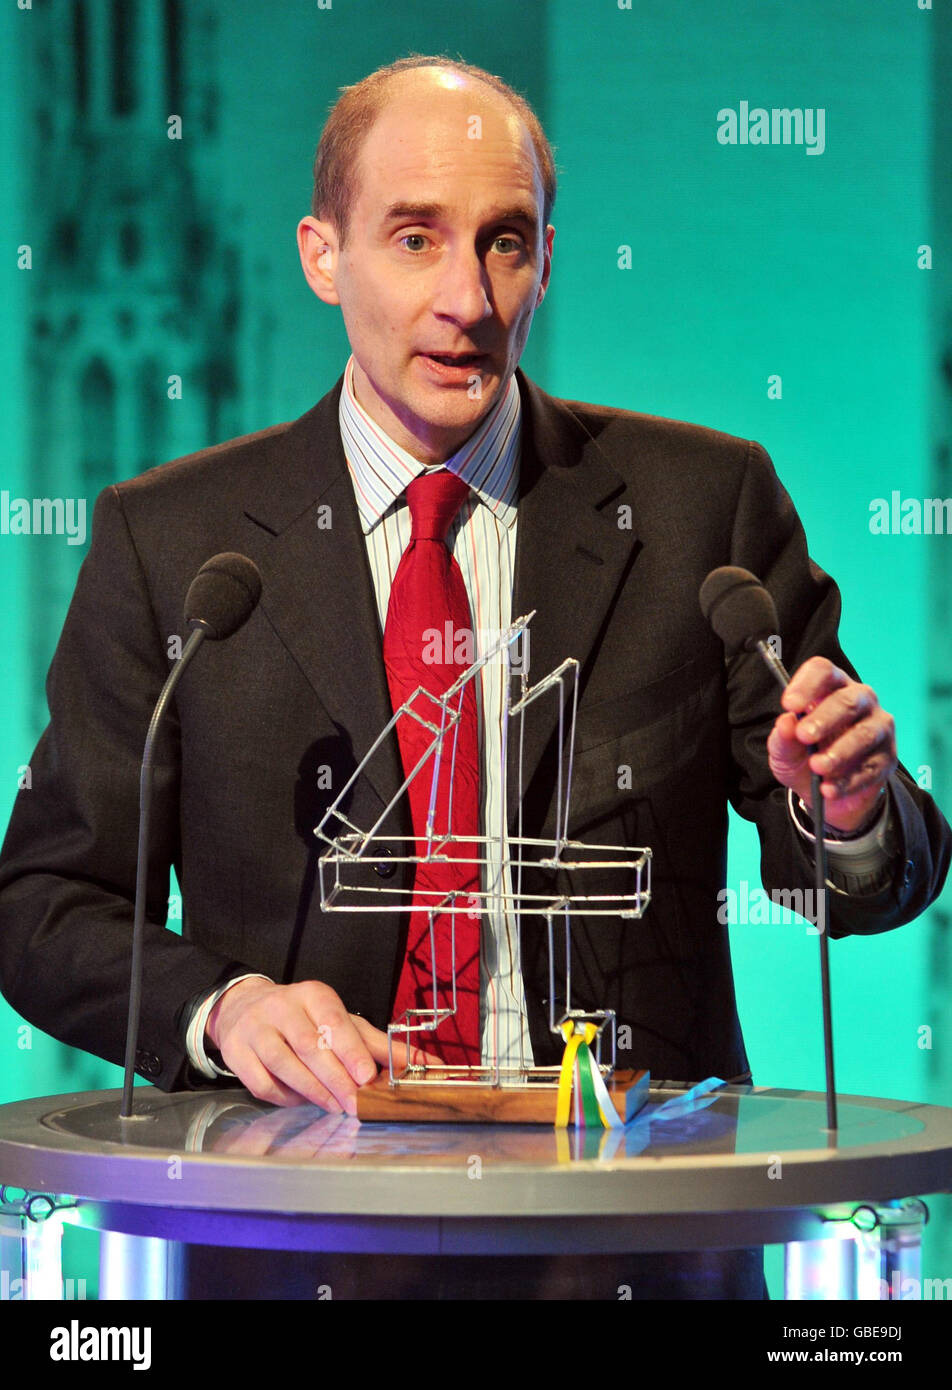 Lord Adonis addresses the audience after winning the Peer of the year award, during the Channel 4 News political awards ceremony in London. Stock Photo